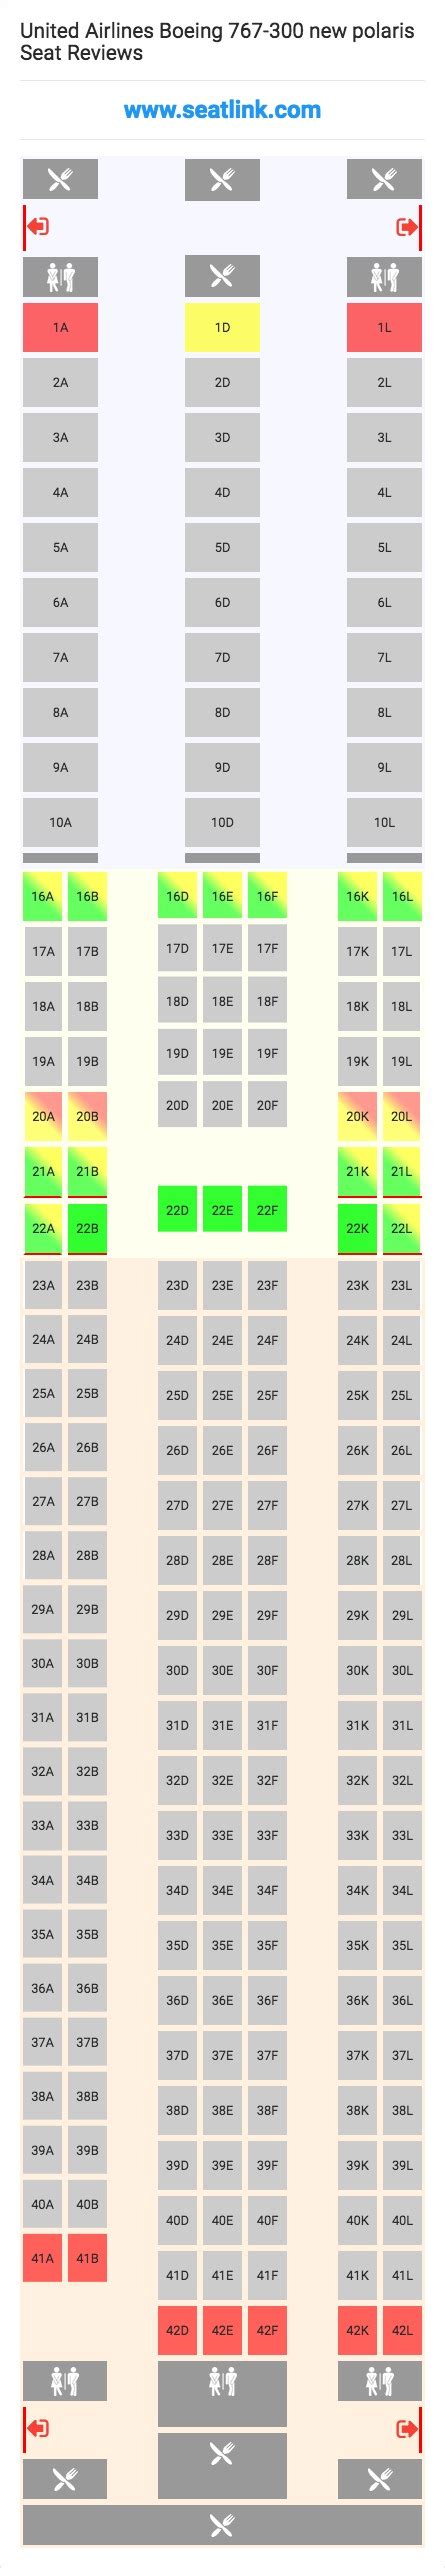 United Airlines Boeing 767 300 New Polaris Seating Chart Updated